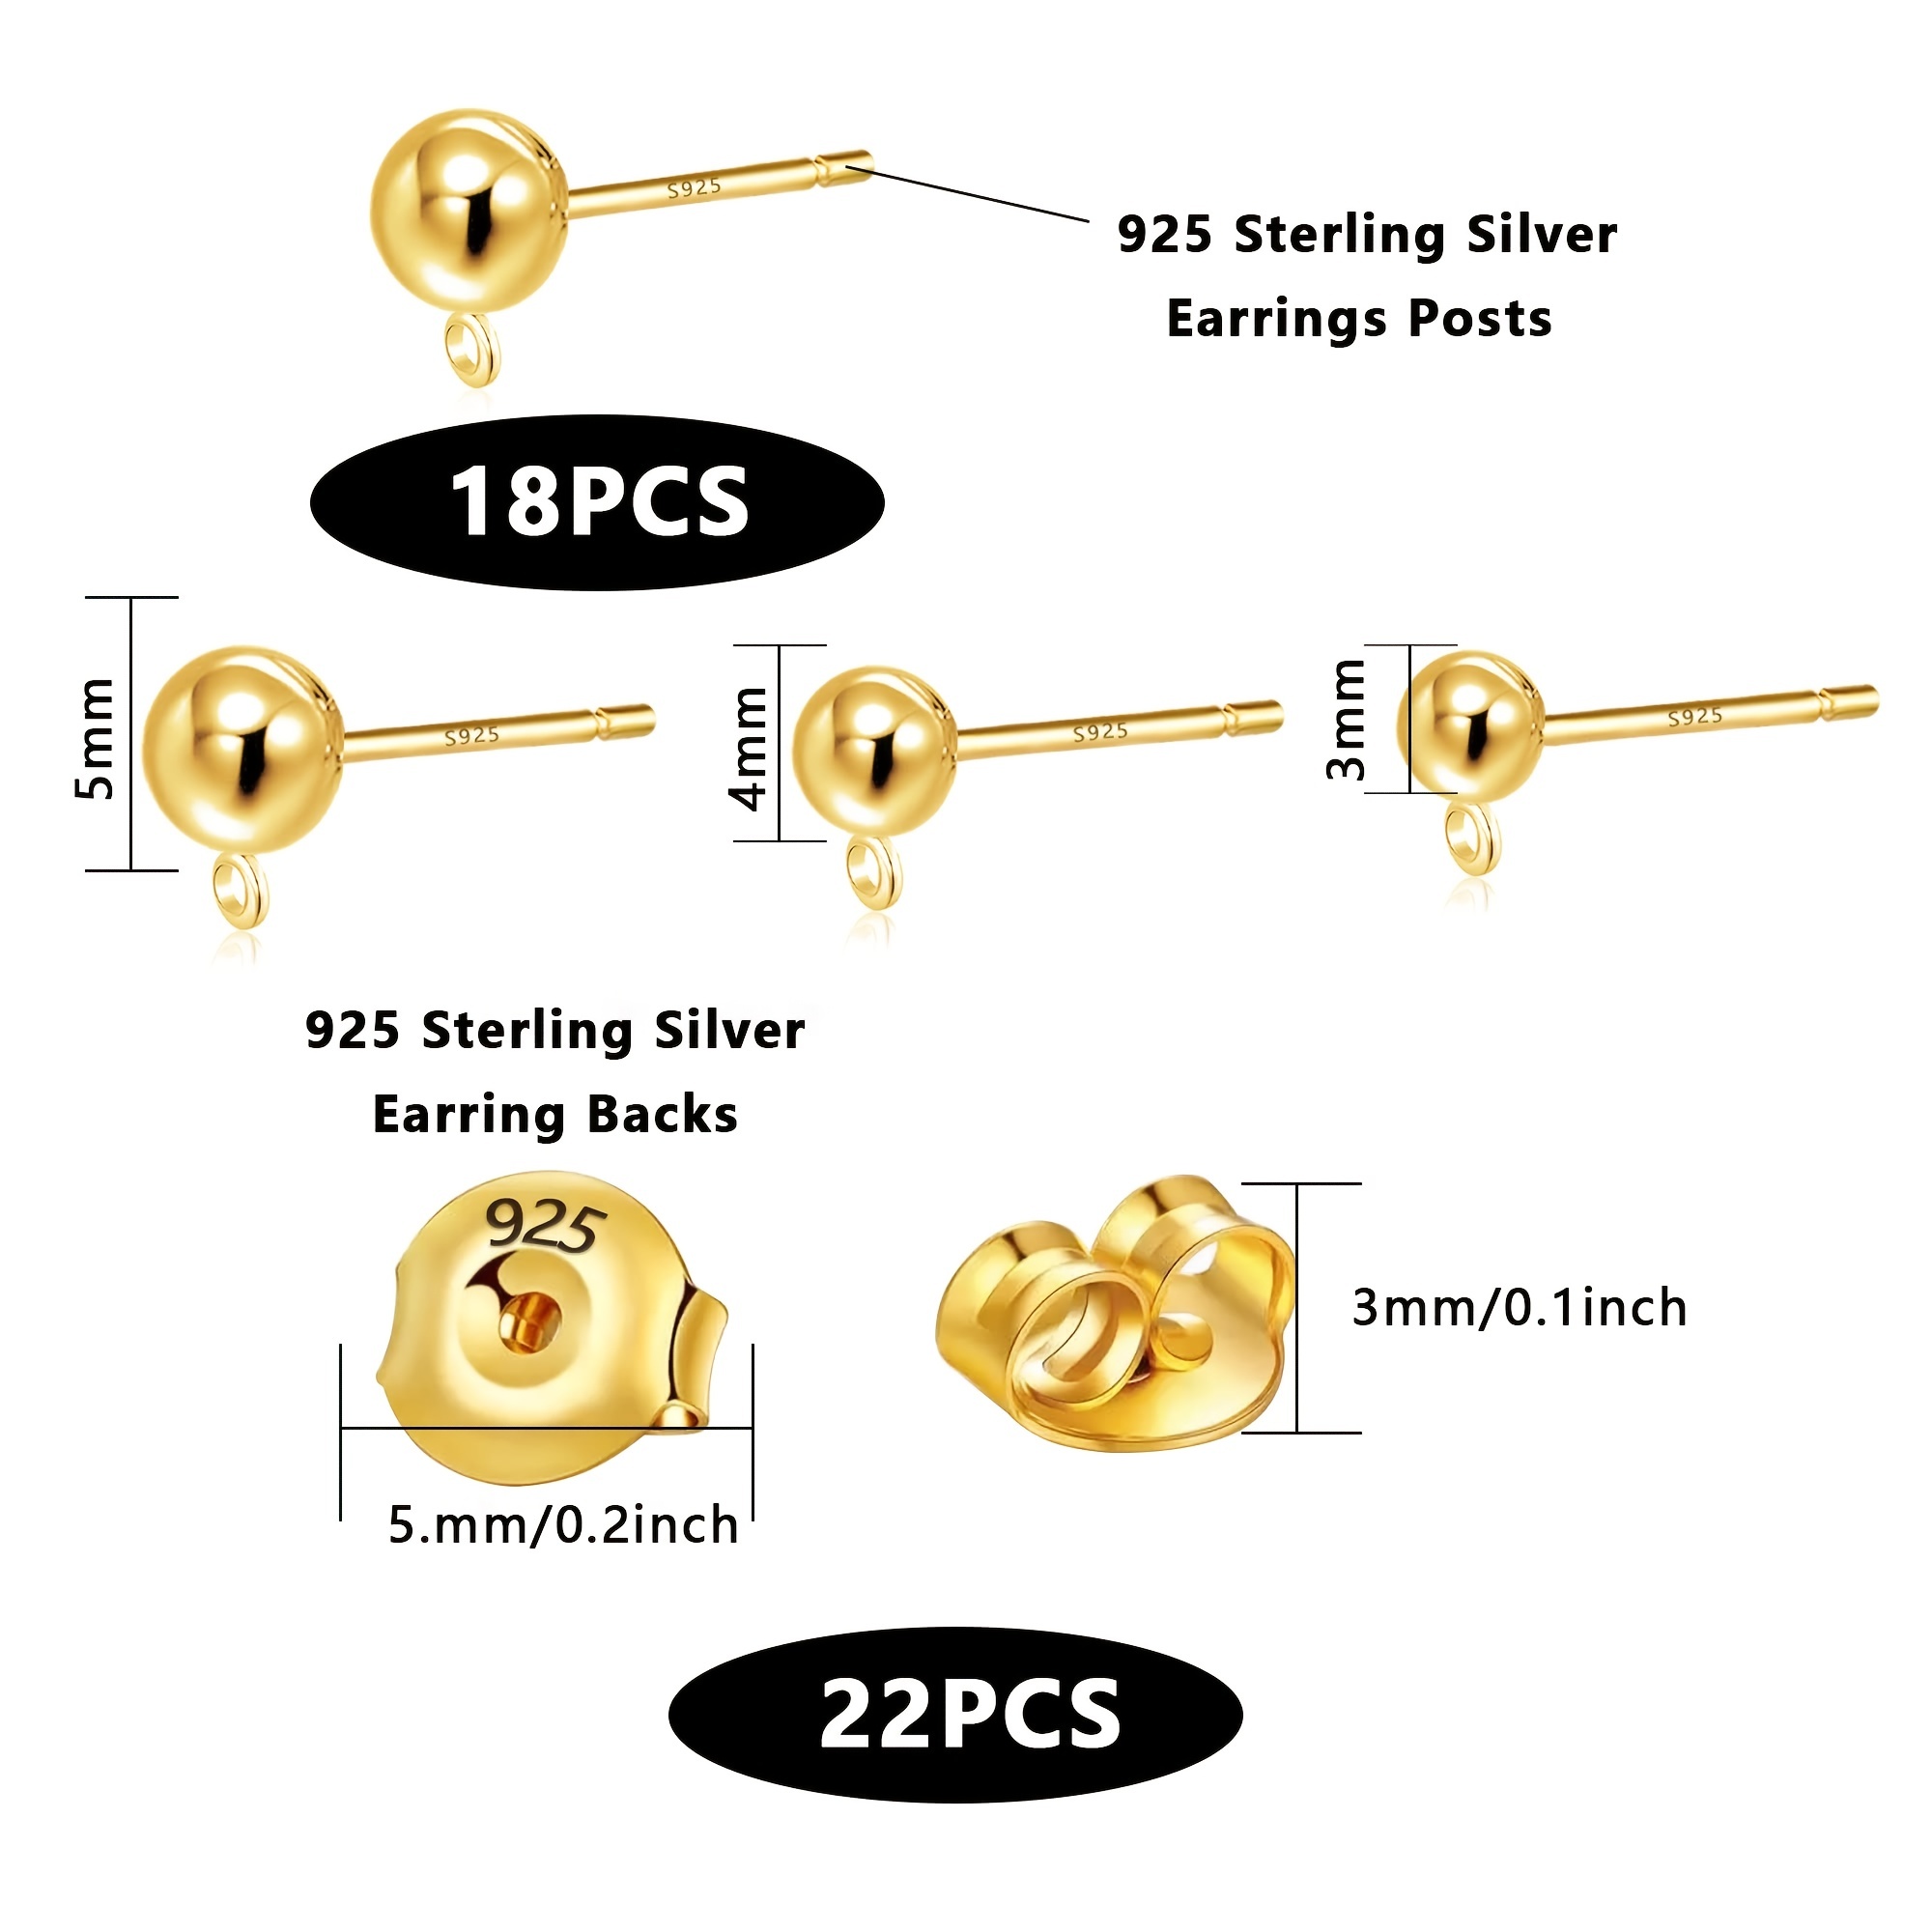 2 Pairs Screw Earring Backs Replacement, 925 Sterling Silver Screw on Earring Backs for Studs, Hypoallergenic Gold Plated Secure Screw Backs Fit for